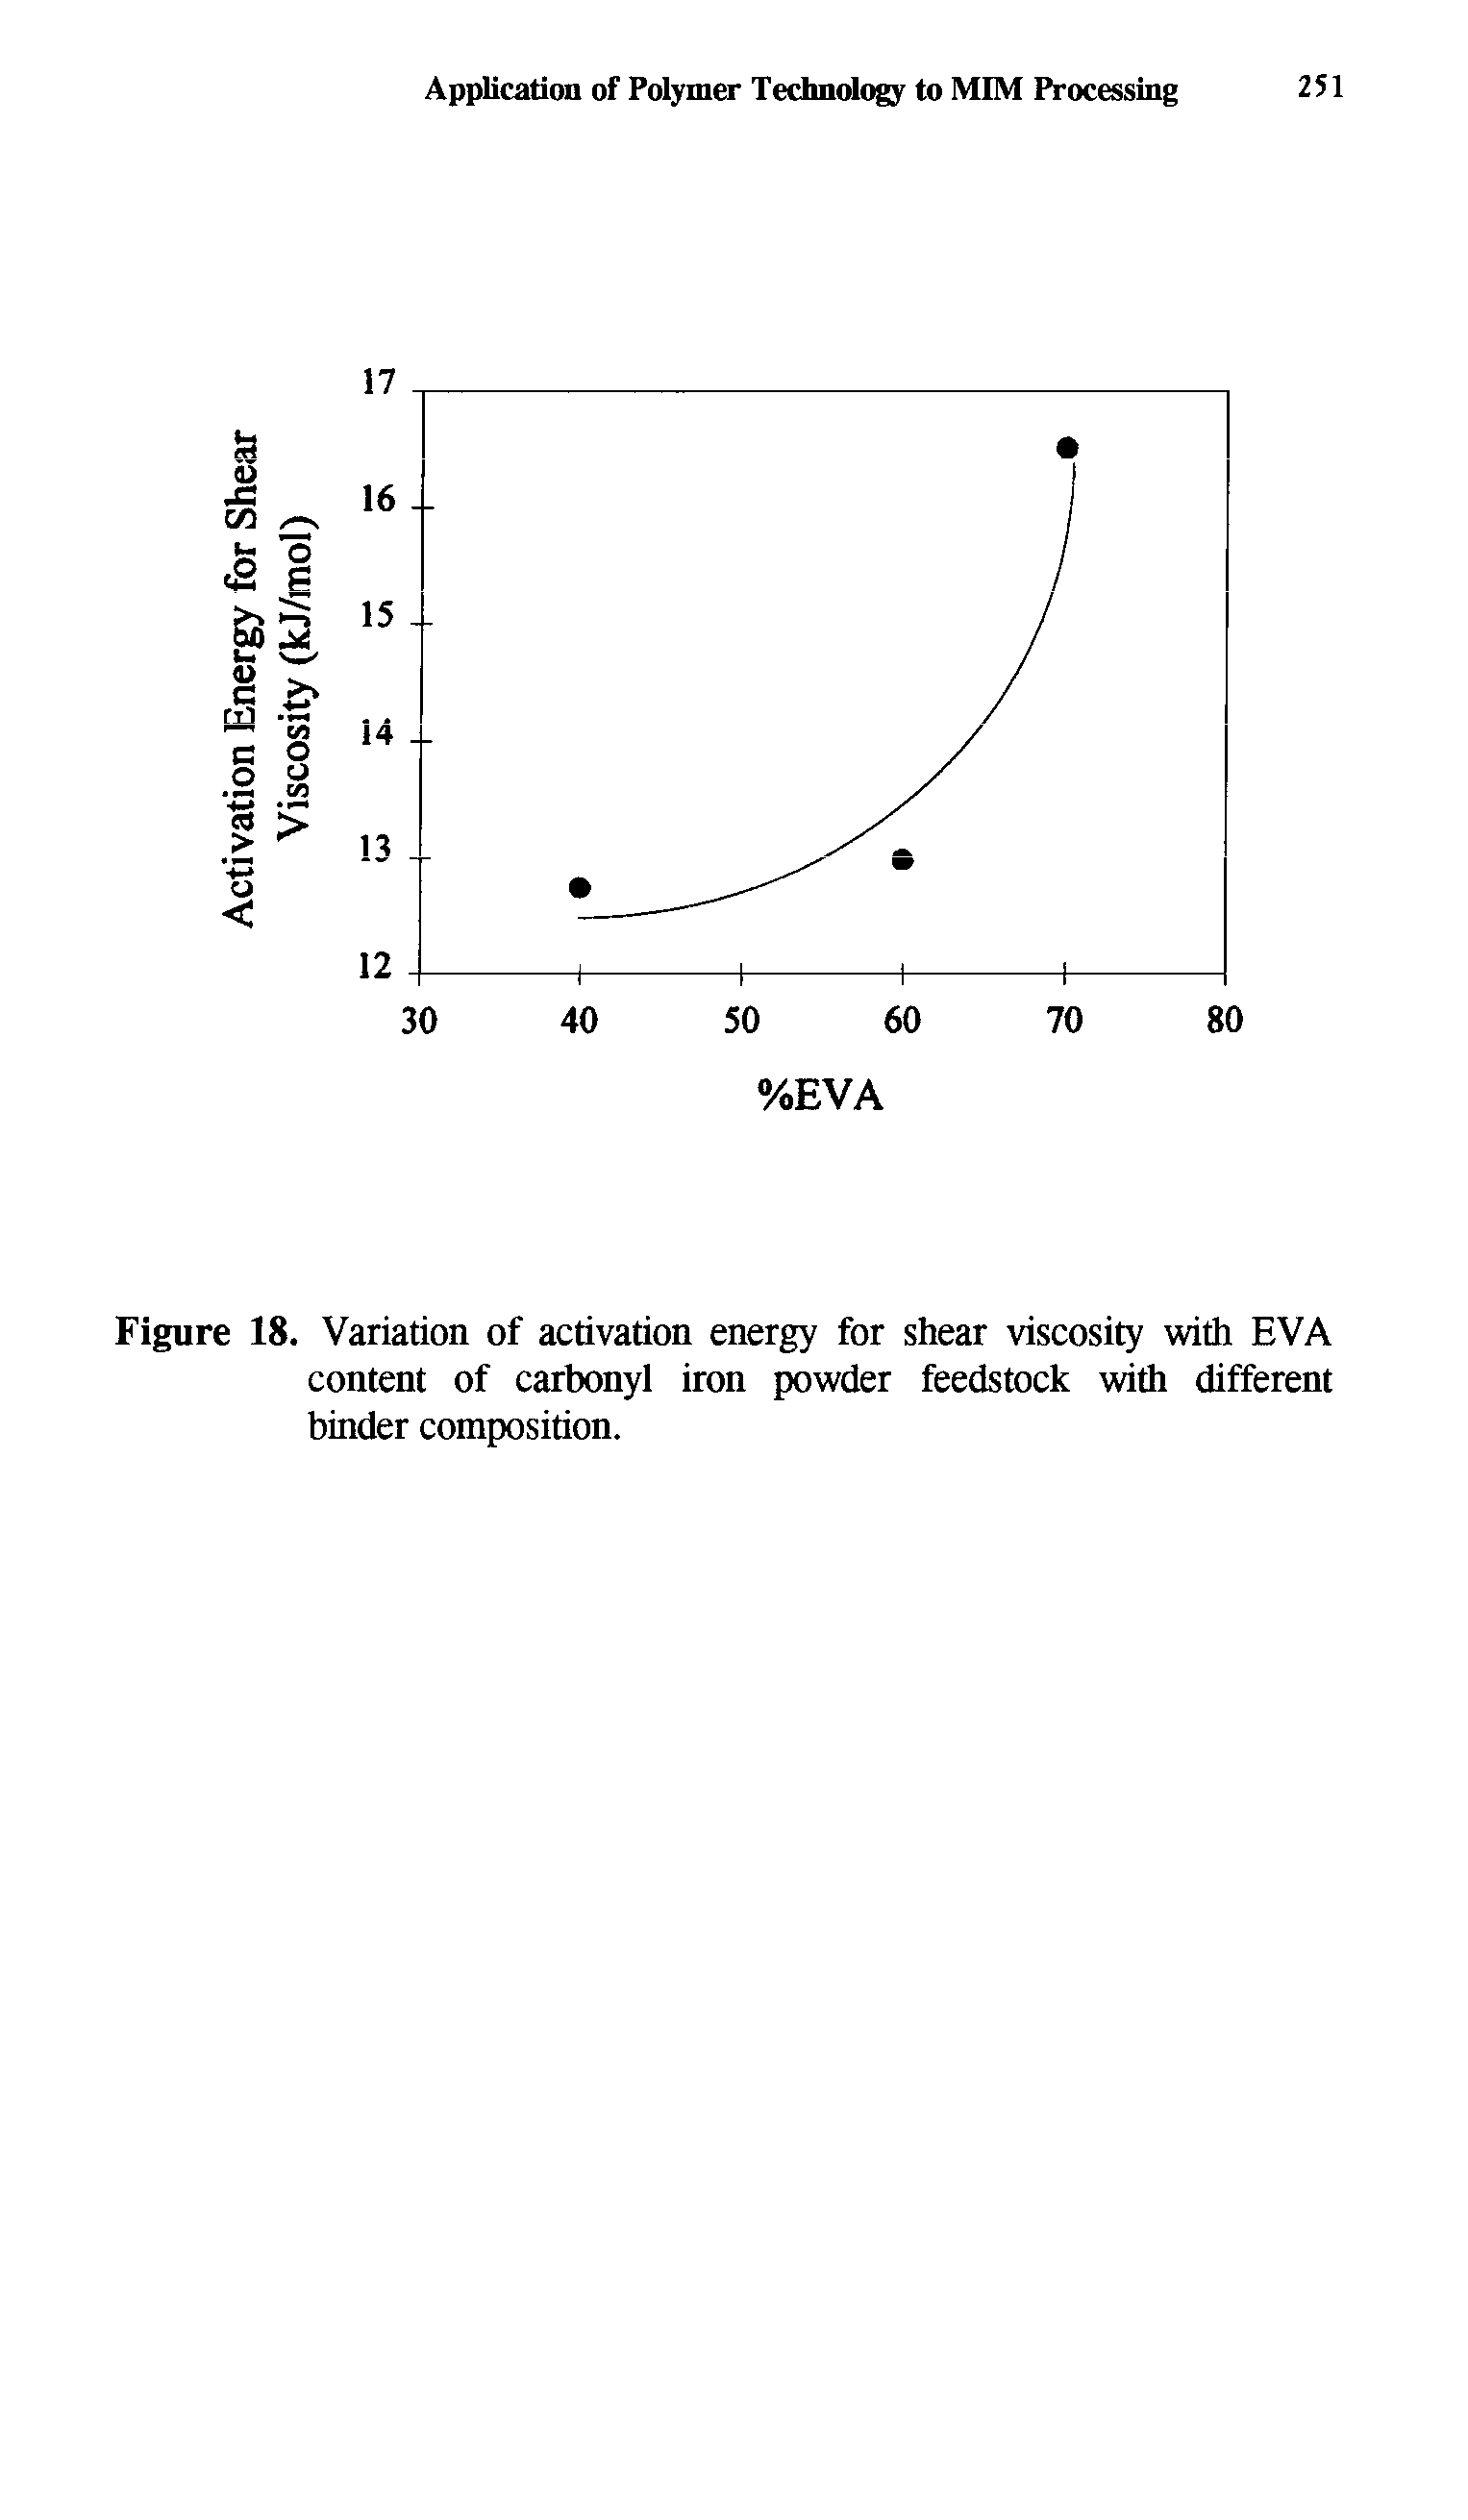 Figure 18. Variation of activation energy for shear viscosity with EVA content of carbonyl iron powder feedstock with different binder composition.